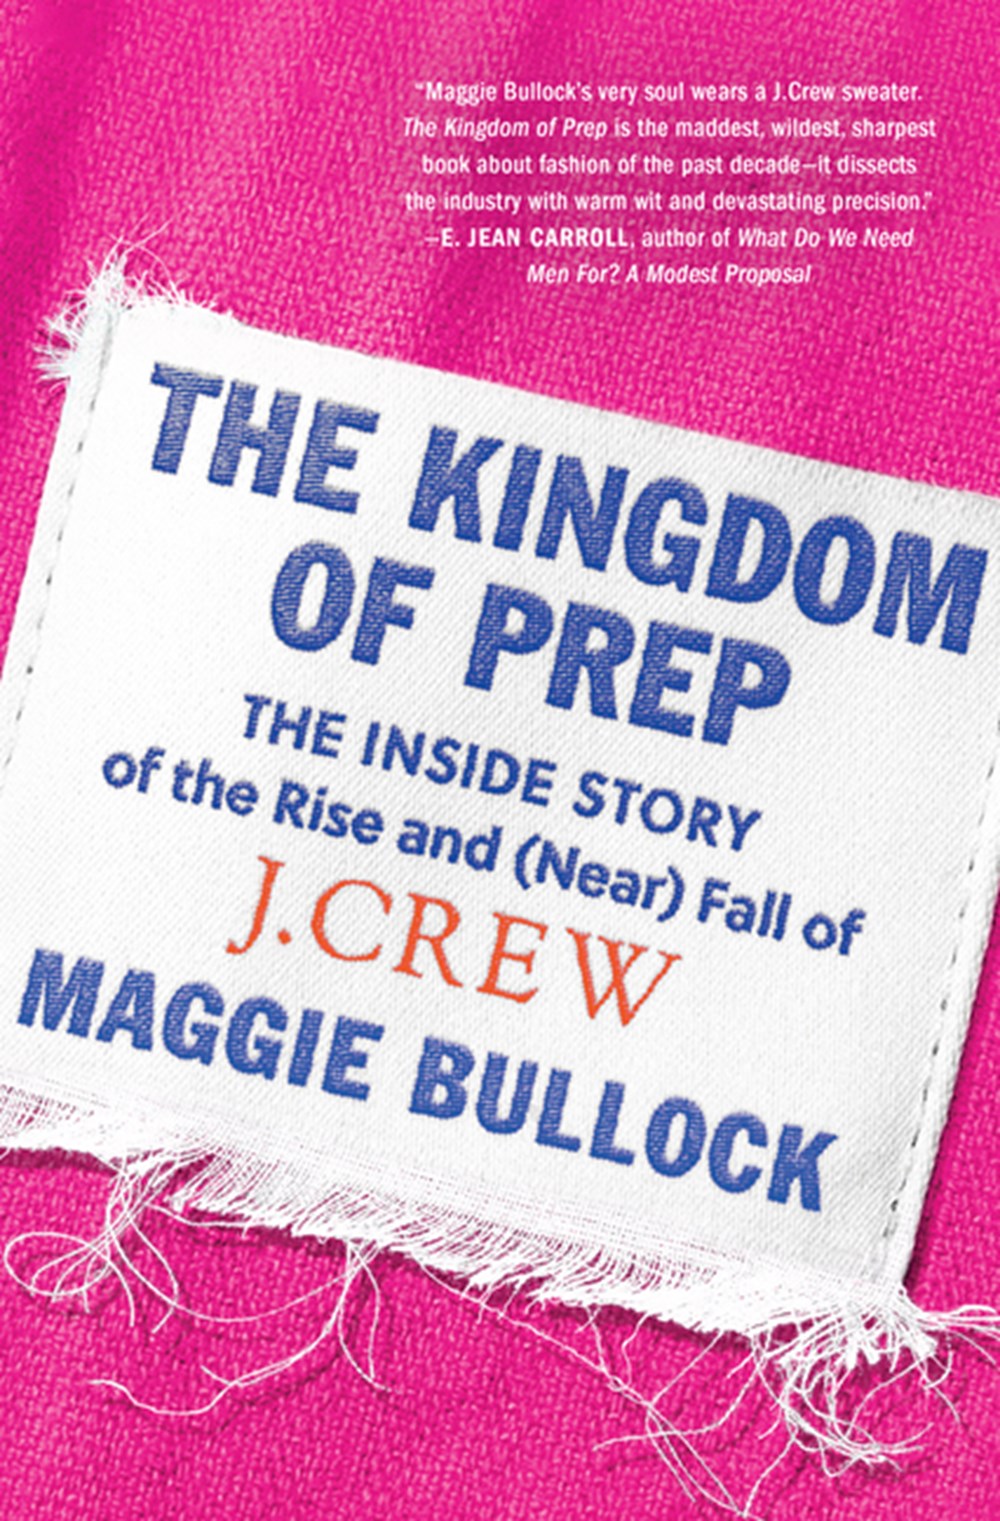 Kingdom of Prep: The Inside Story of the Rise and (Near) Fall of J.Crew